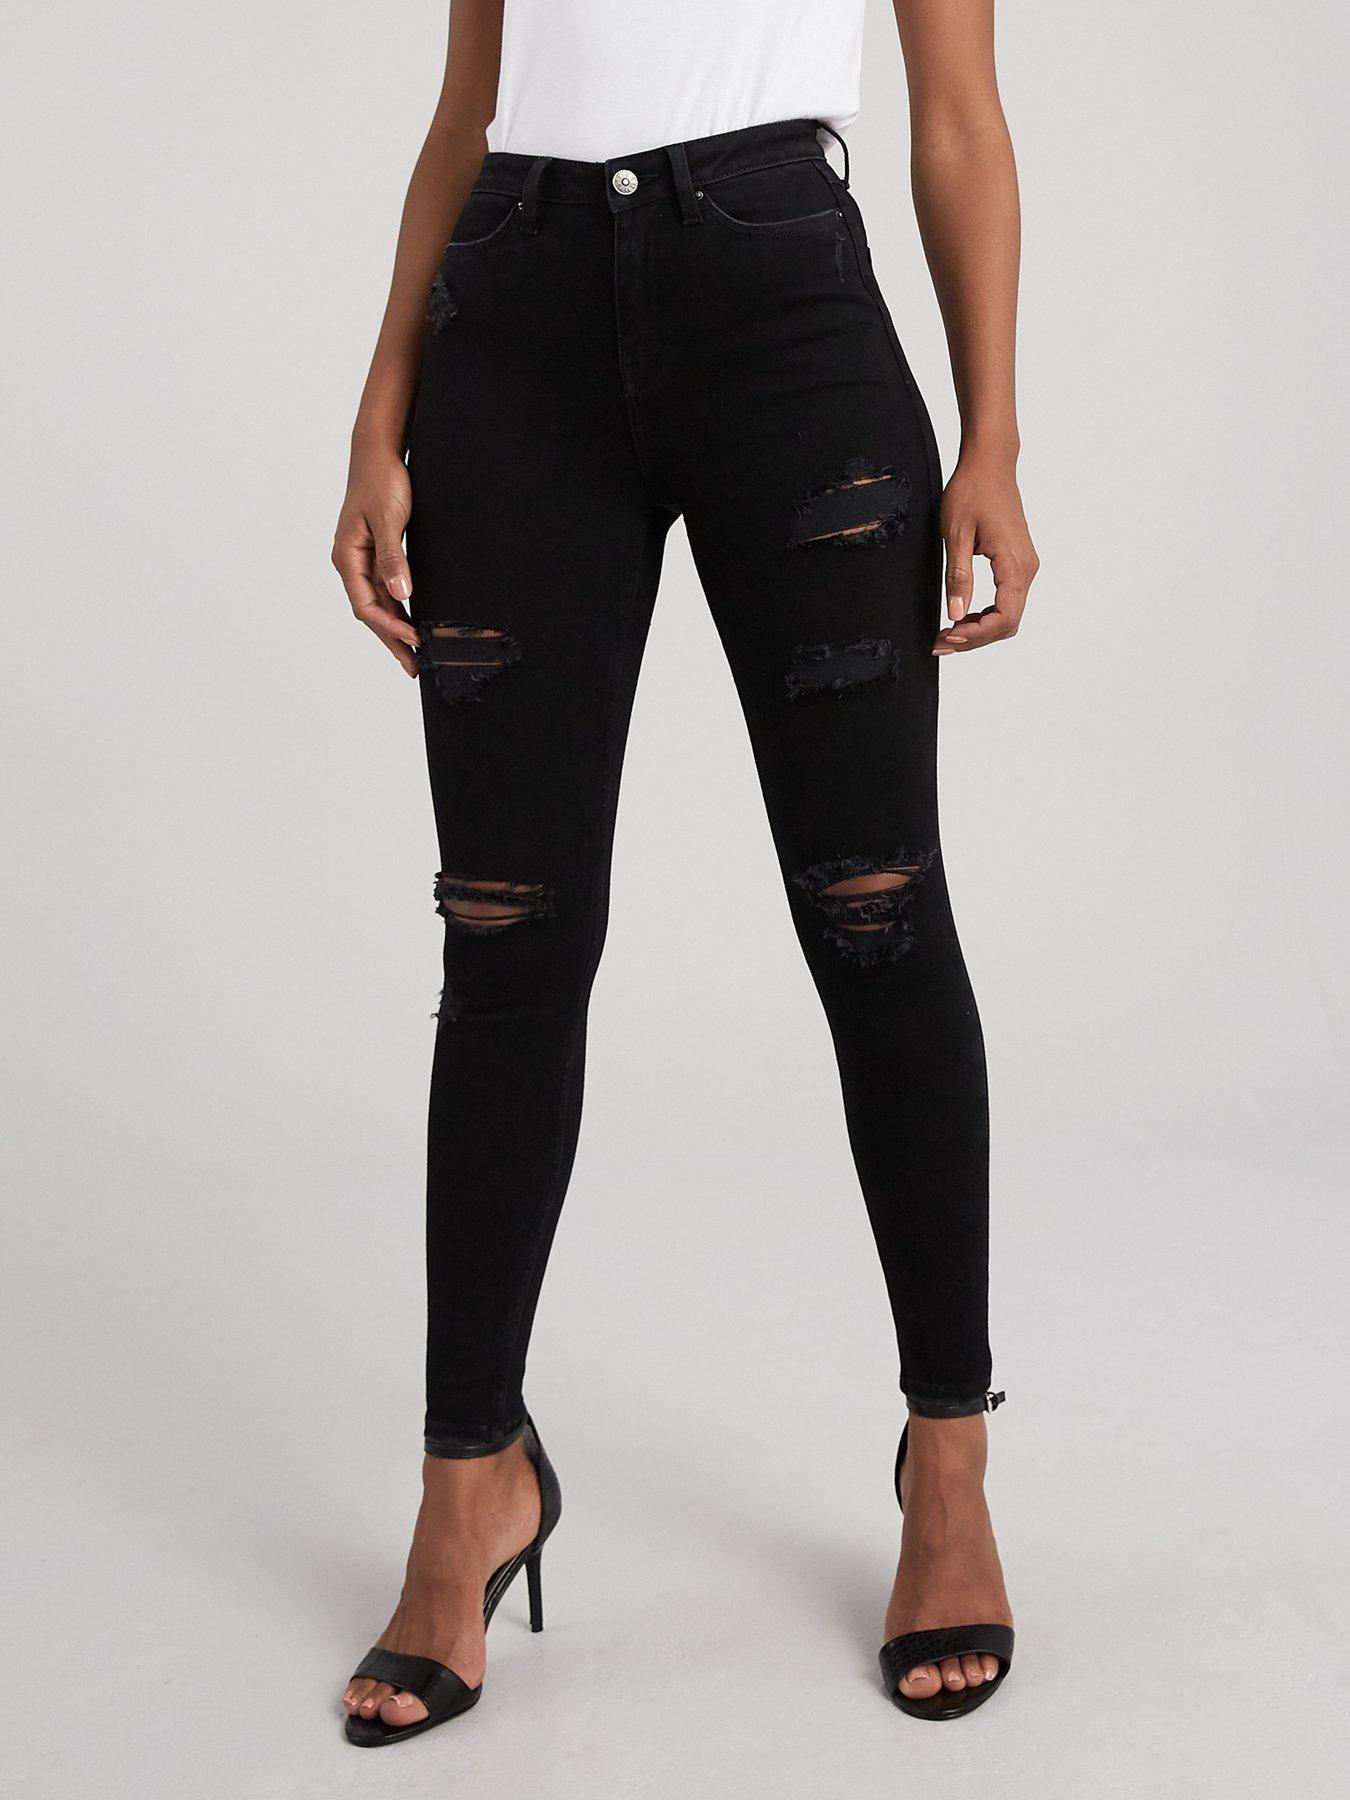 high waisted black jeans distressed